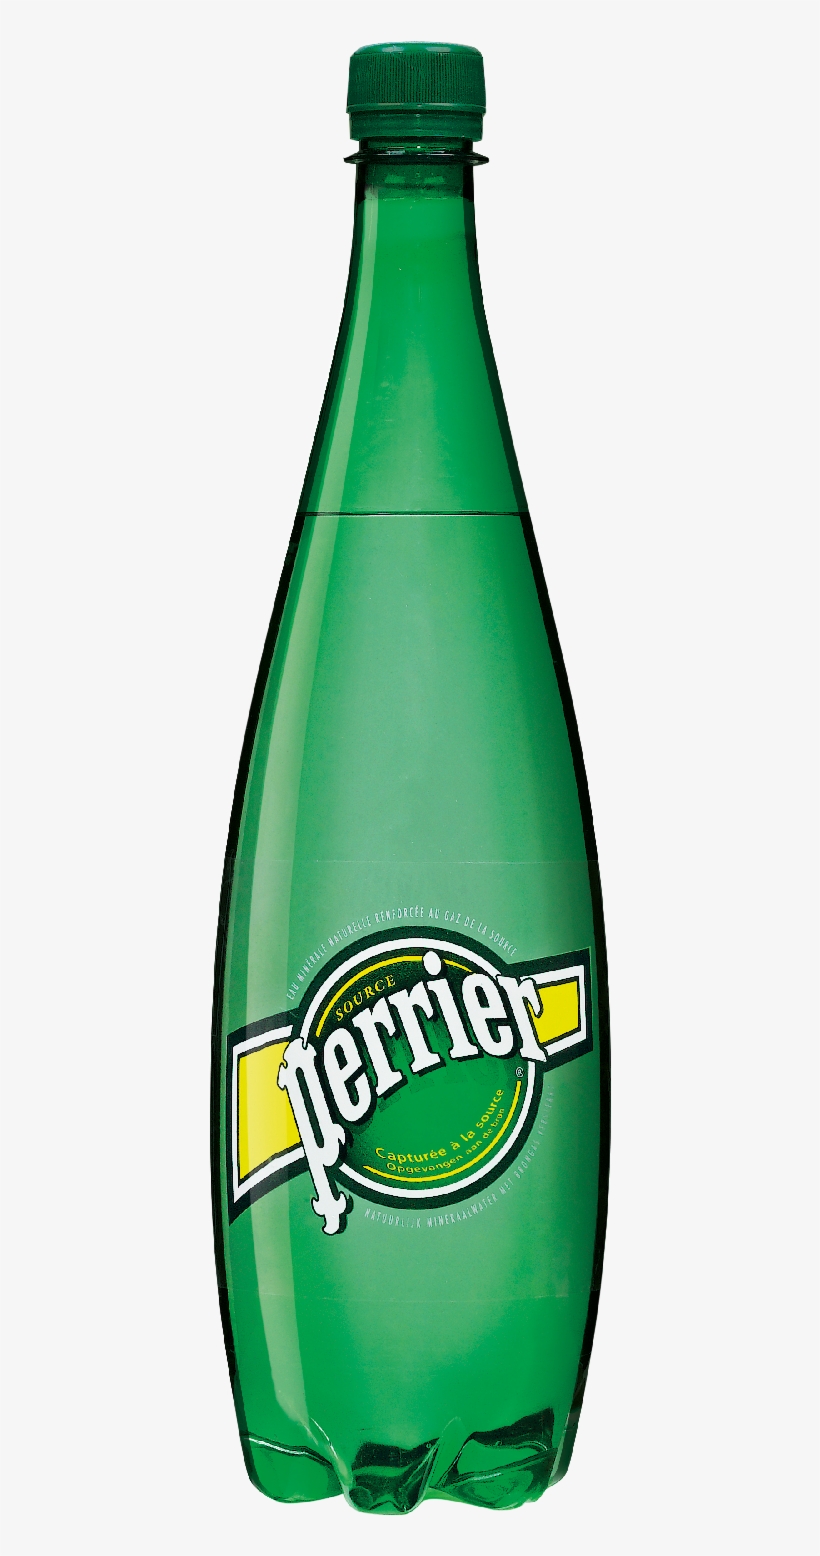 Now Comparing The Bottles With Sparkling Waters - Sparkling Water Brands Perrier, transparent png #2931970